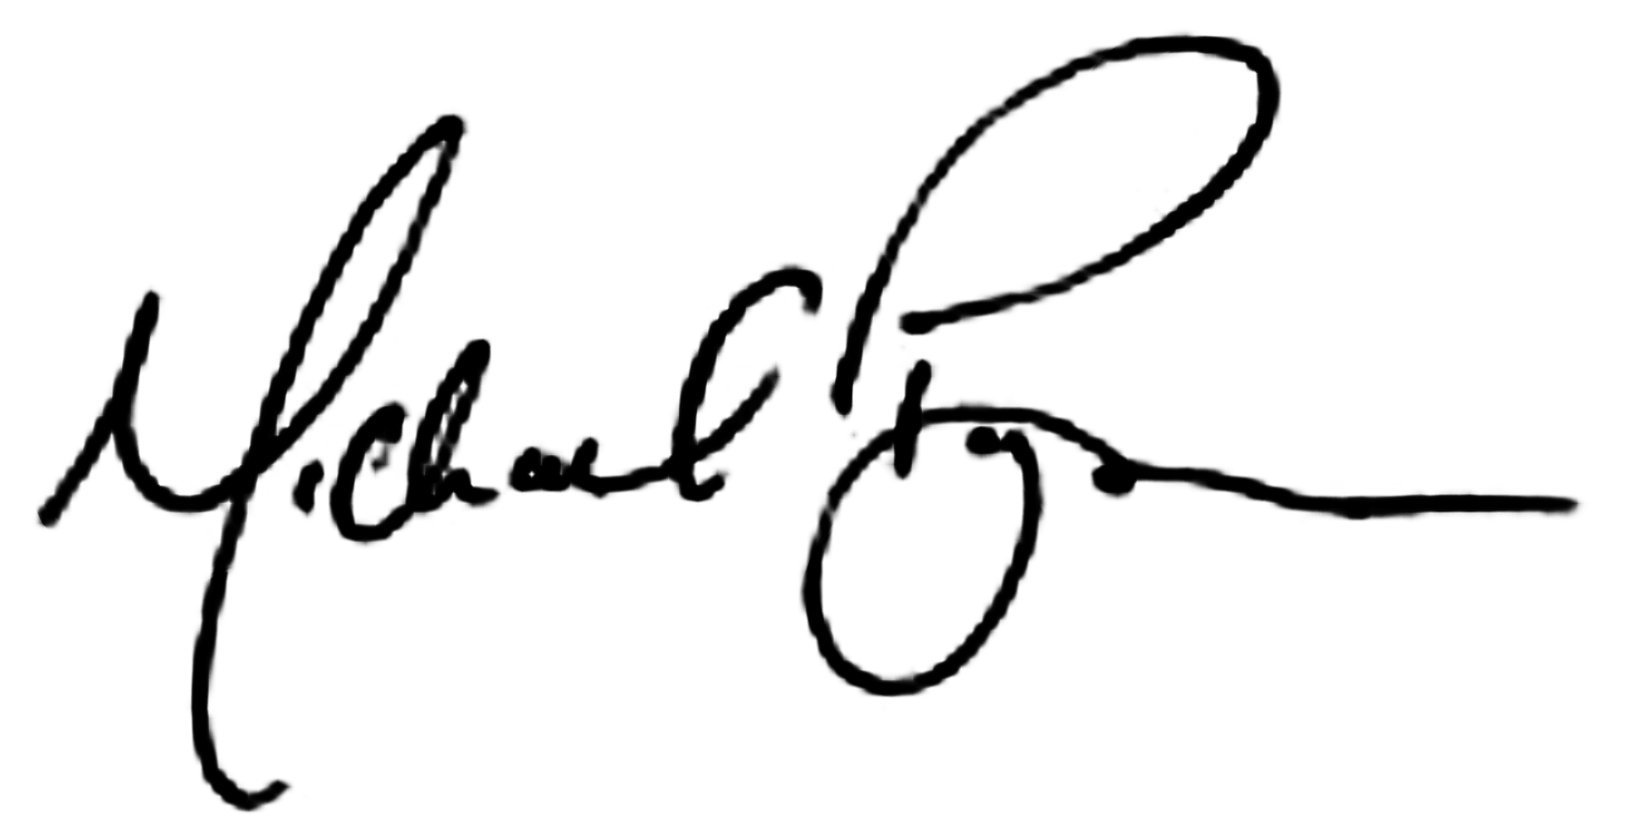 Signature of Councillor Michael Payne (Chair of the Combined Fire Authority)